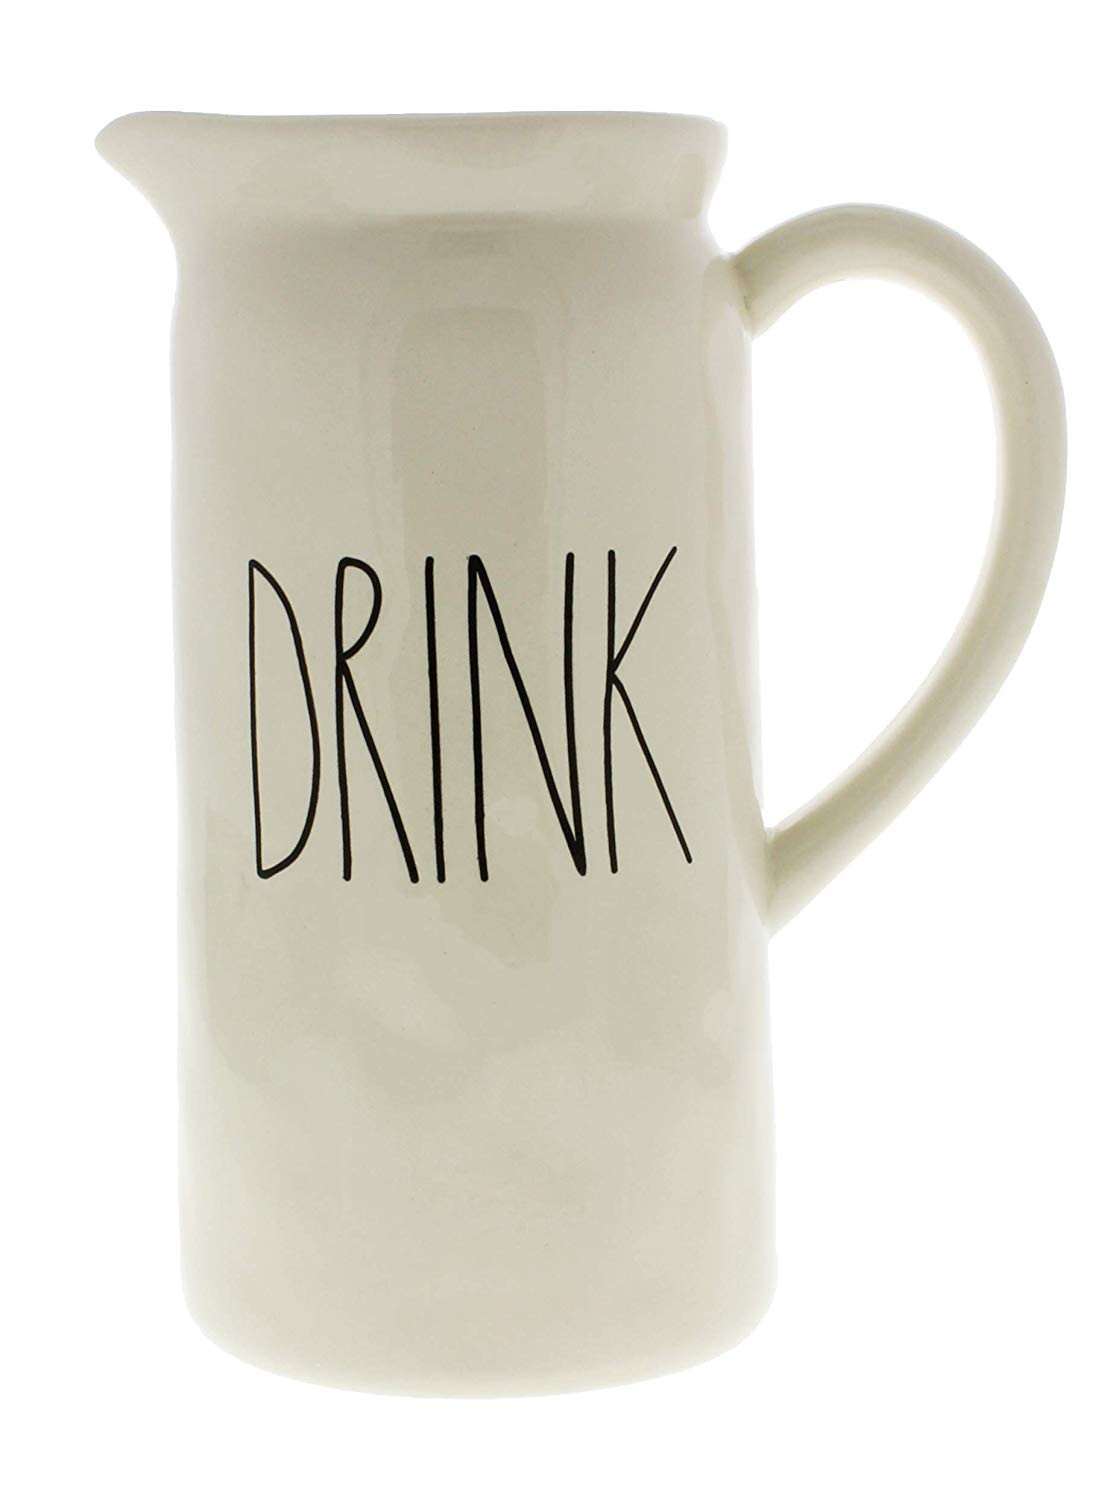 large white pitcher vase of amazon com rae dunn pour pitcher jug container by magenta pertaining to amazon com rae dunn pour pitcher jug container by magenta carafes pitchers